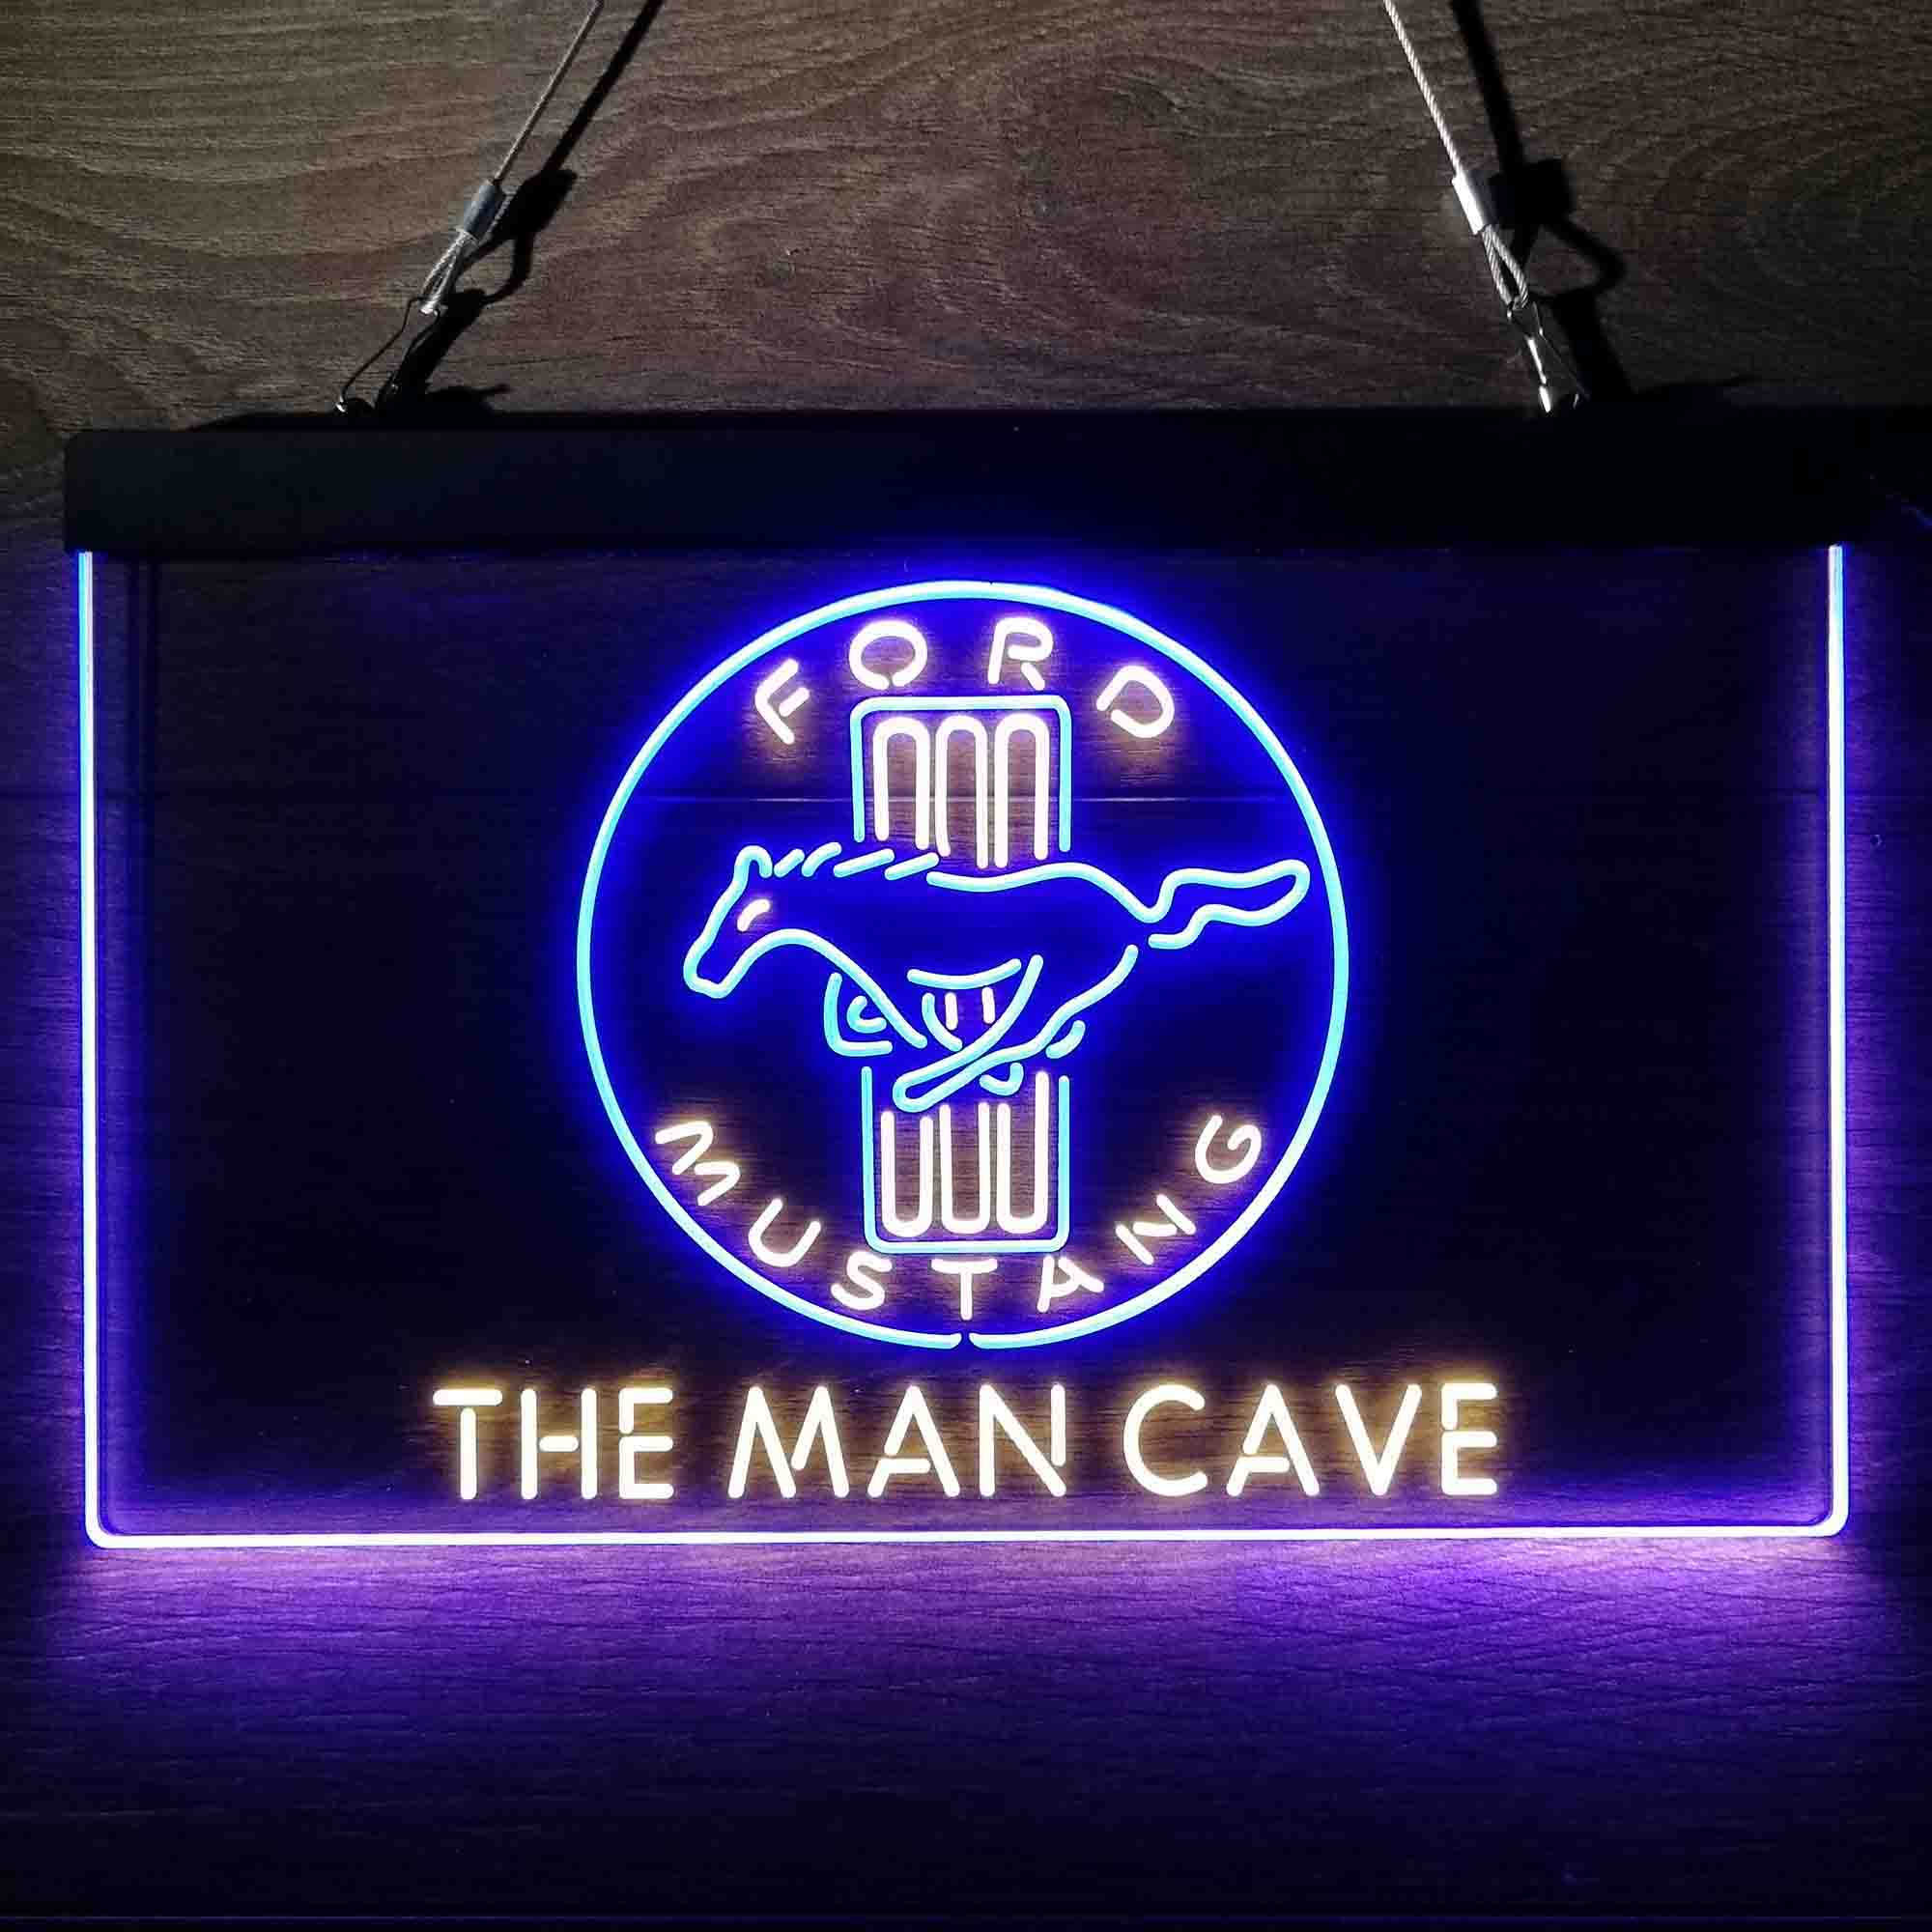 Personalized Ford Mustang Garage Neon-Like LED Sign